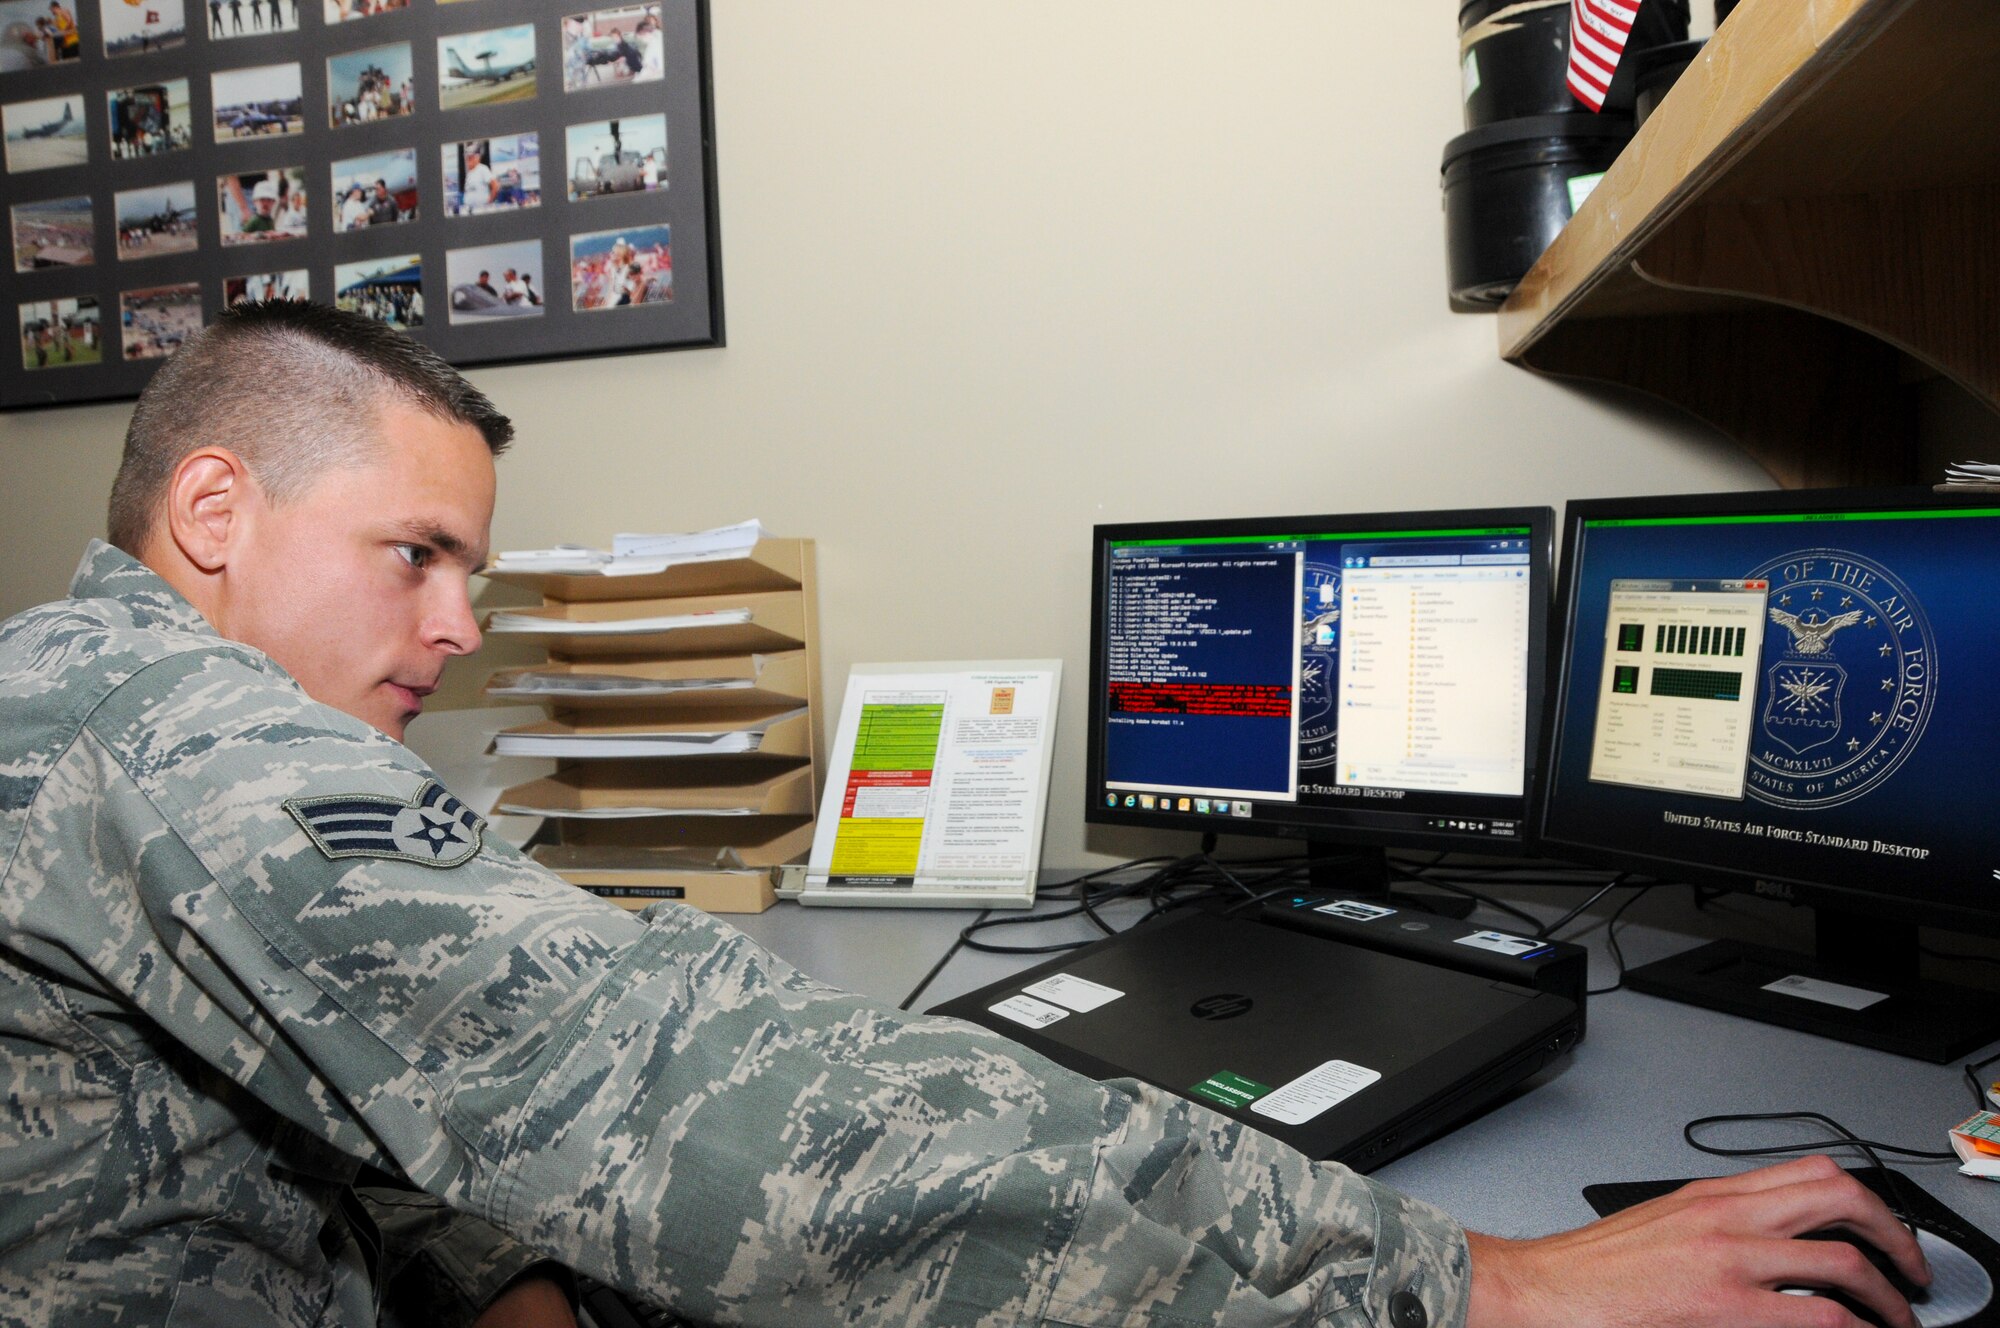 Senior Airman Tyler Price, information technology specialist and cyber systems operator, at Ebbing Air National Guard Base, Fort Smith, Ark., troubleshoots a laptop Oct. 26, 2015. Price was awarded the Airman of the Quarter award Sept. 30 for exemplifying leadership and performance skills, self-improvement and physical fitness as well as base and community involvement. (U.S. Air National Guard photo by Senior Airman Cody Martin/Released)